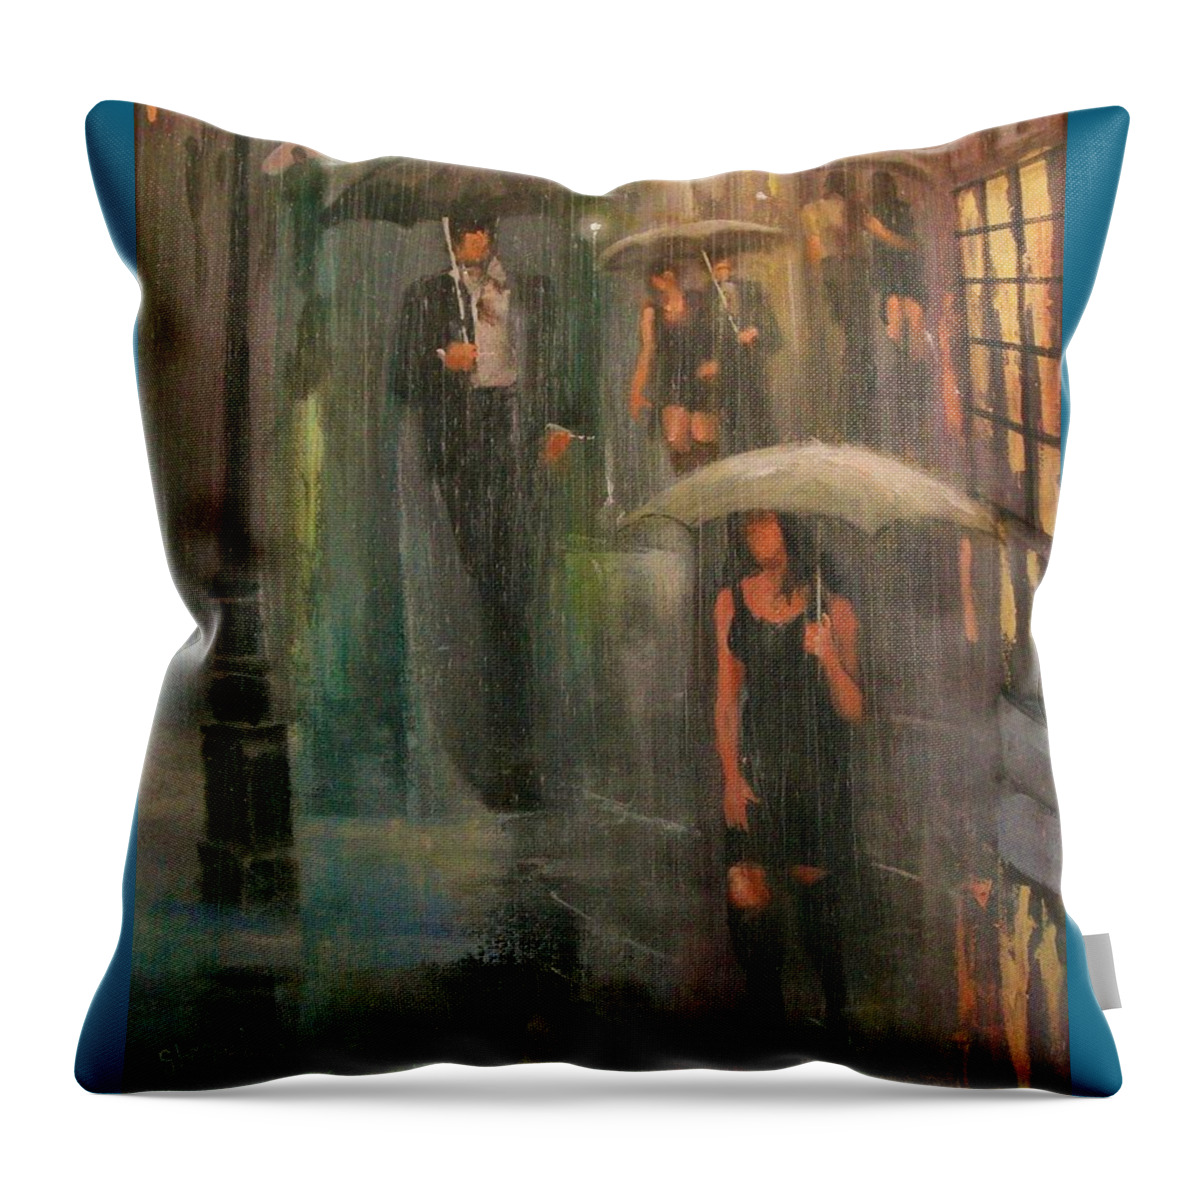  Downpour Throw Pillow featuring the painting Walking in the Rain by Tom Shropshire